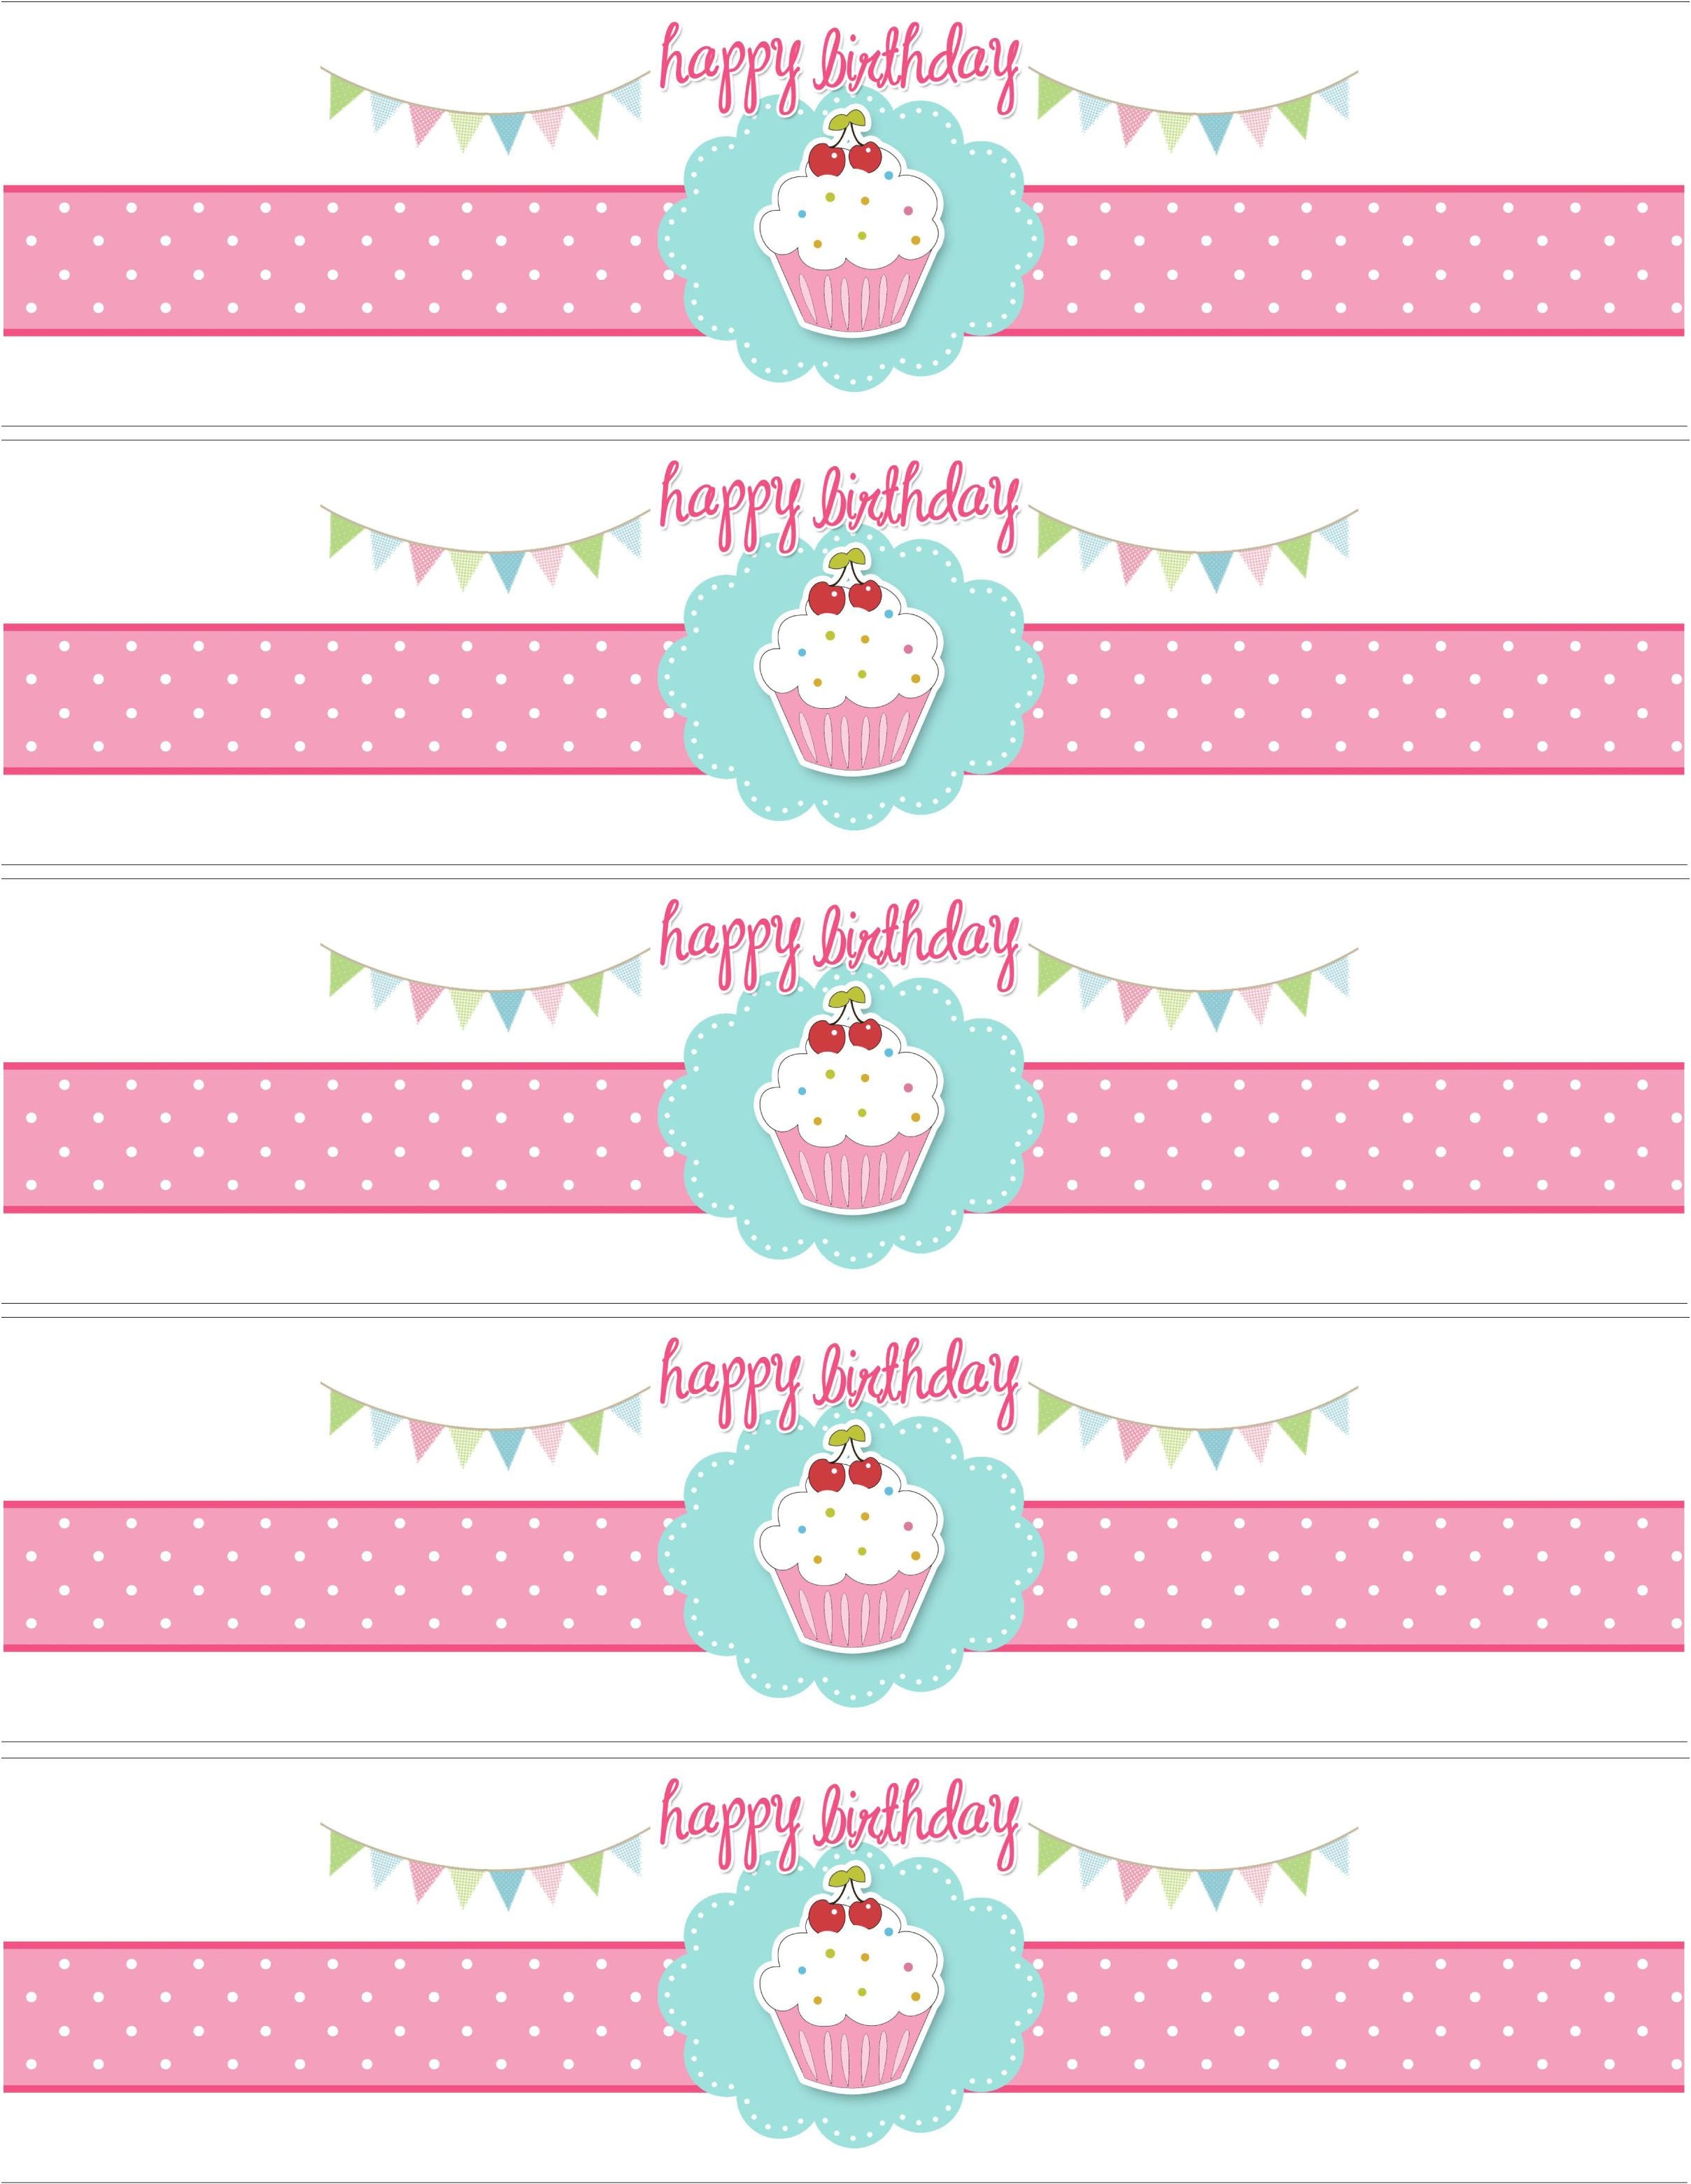 Cupcake Birthday Party With Free Printables | Party Ideas - Free Printable Water Bottle Labels